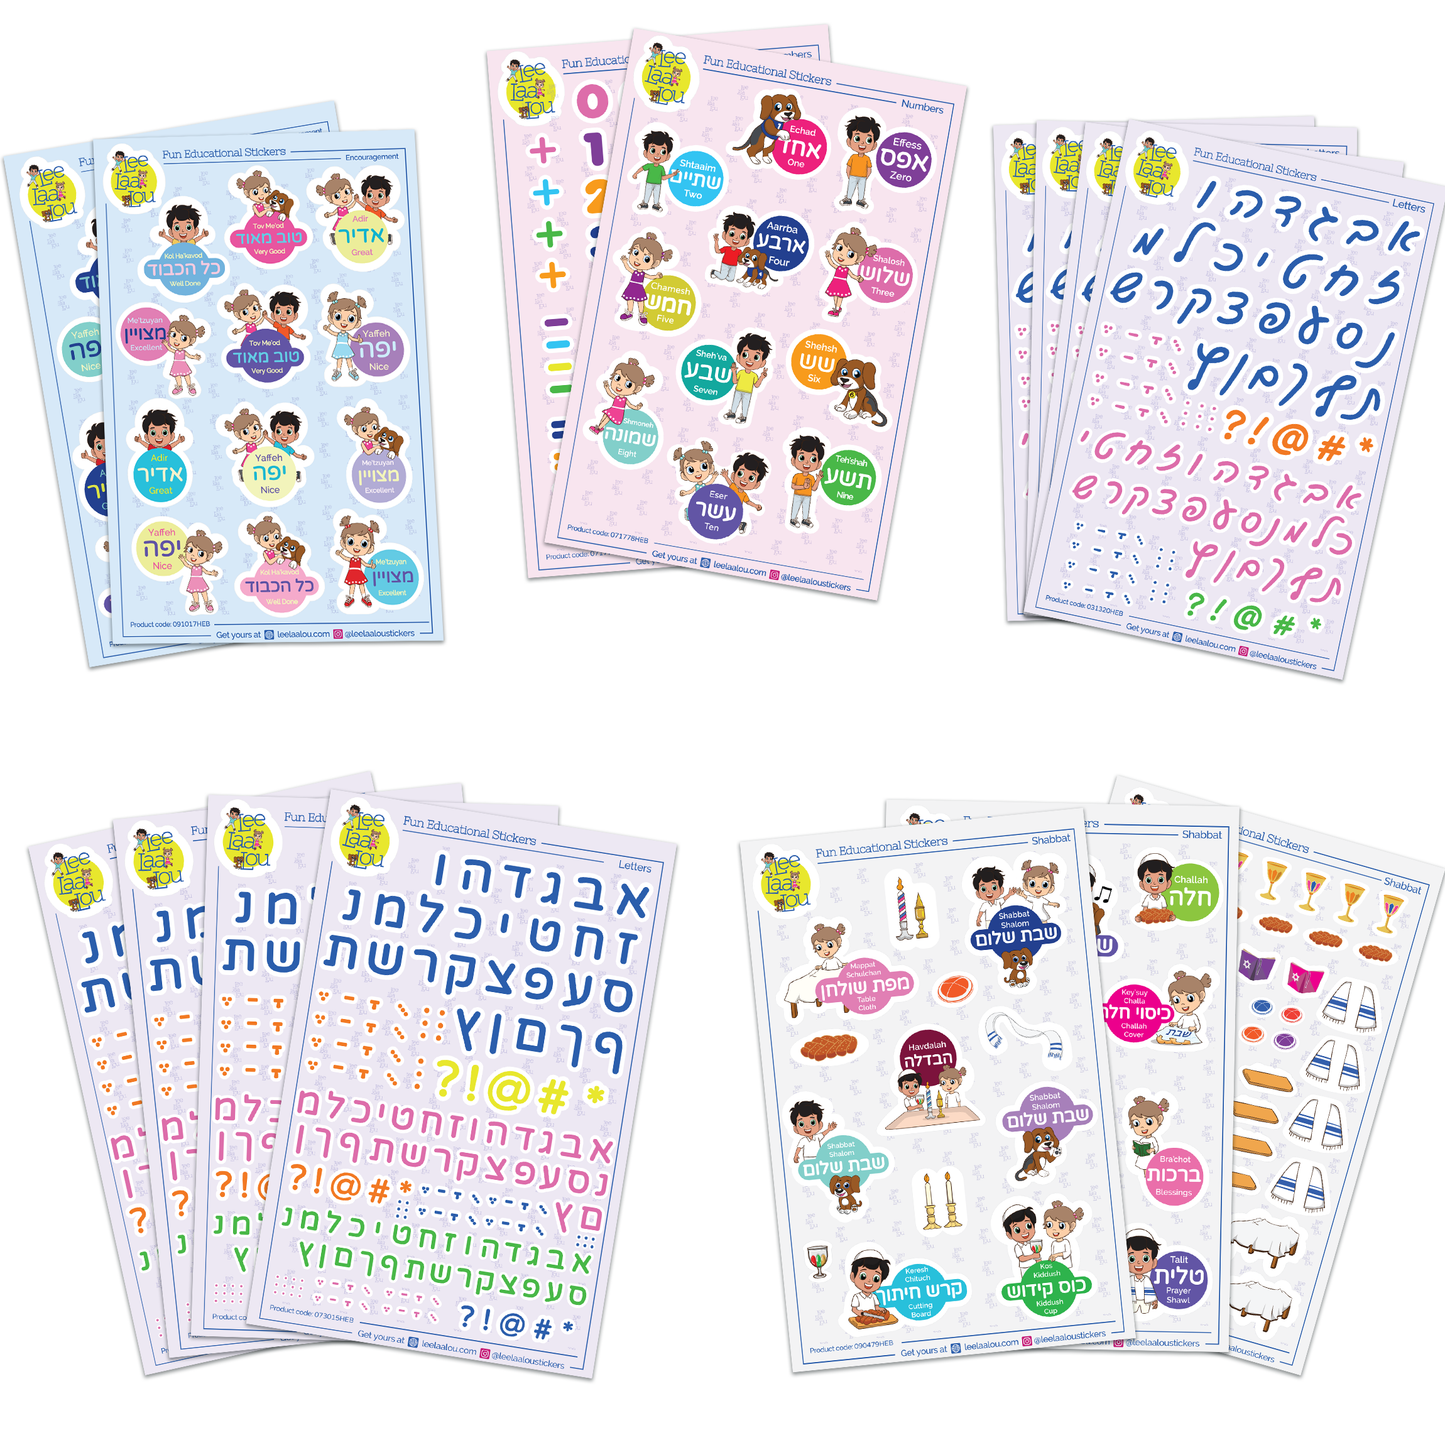 A package of 5 sets of Hebrew stickers. Letters, aplphabet, numbers, Shabbat and encouragement. Great for arts and crafts activities for toddlers, preschoolers and elementary school kids.